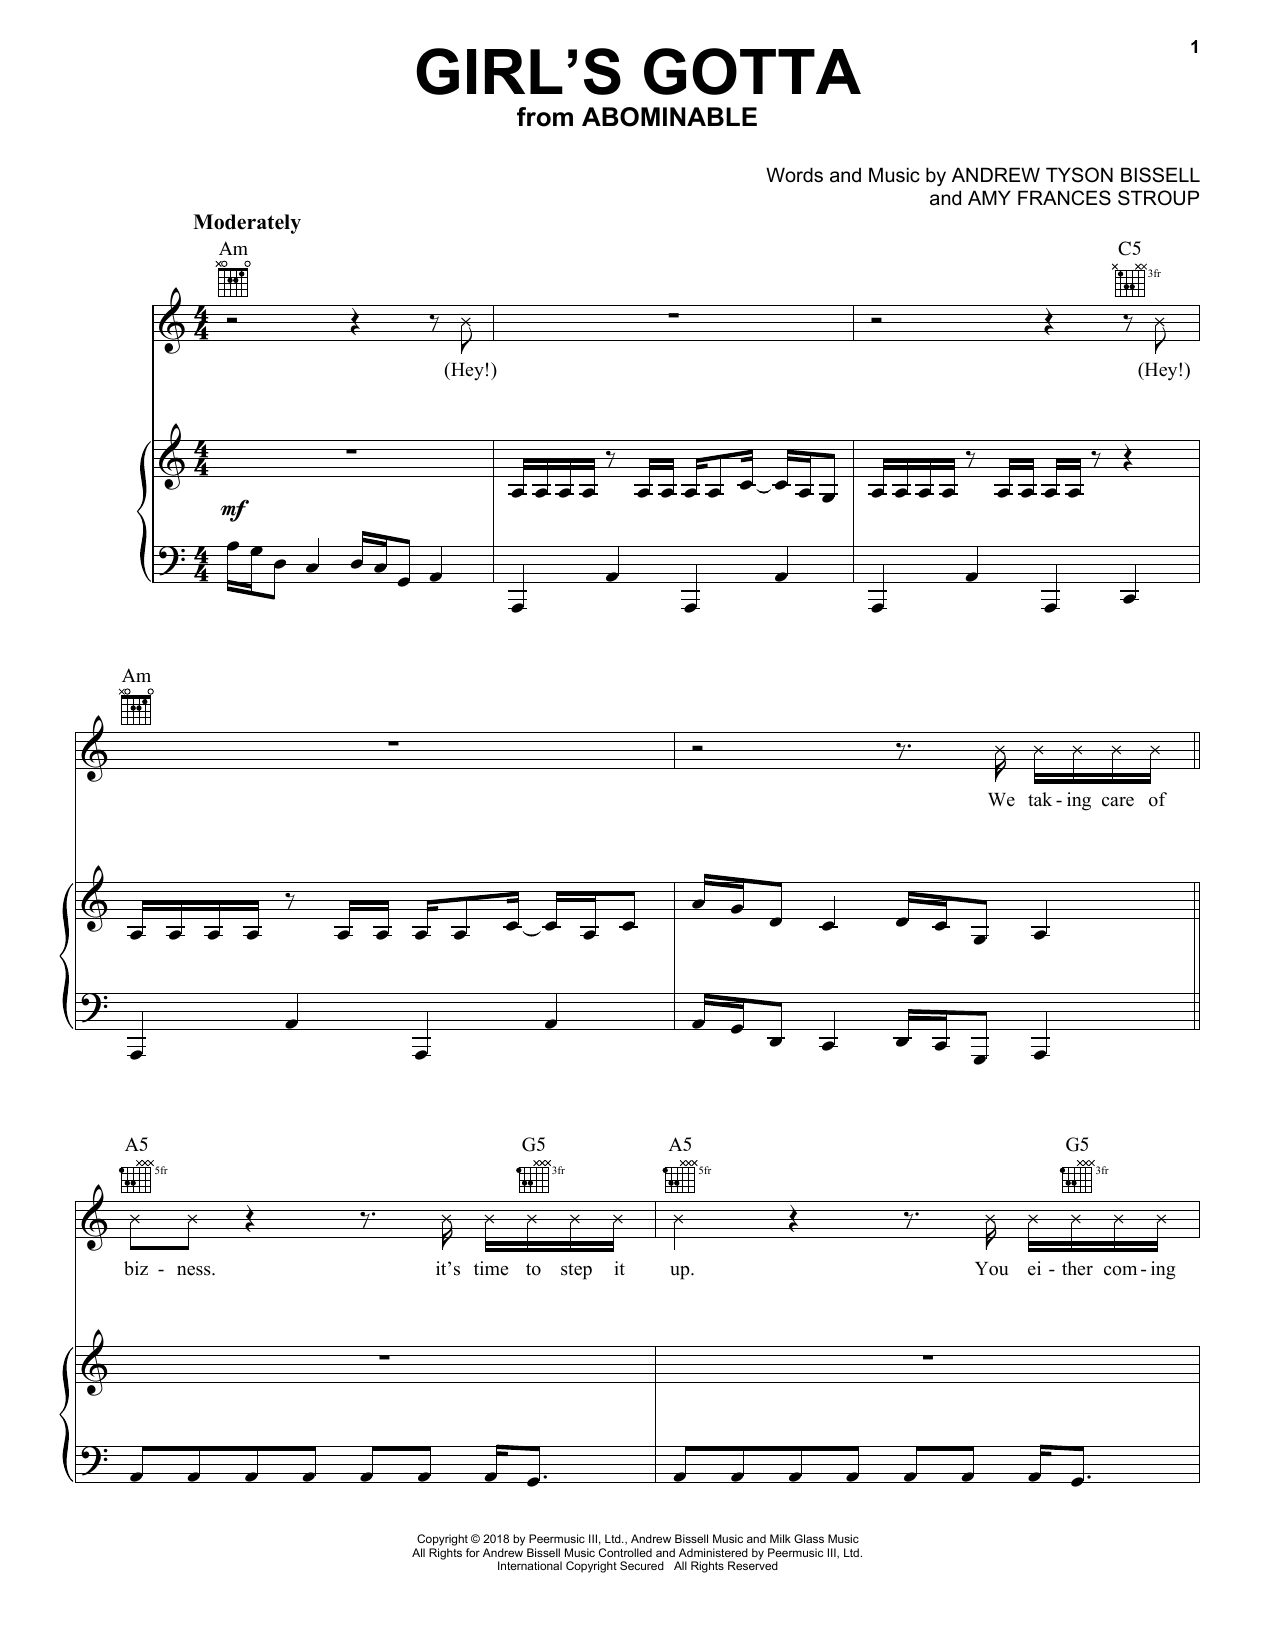 Download Danger Twins Girl's Gotta (from the Motion Picture A Sheet Music